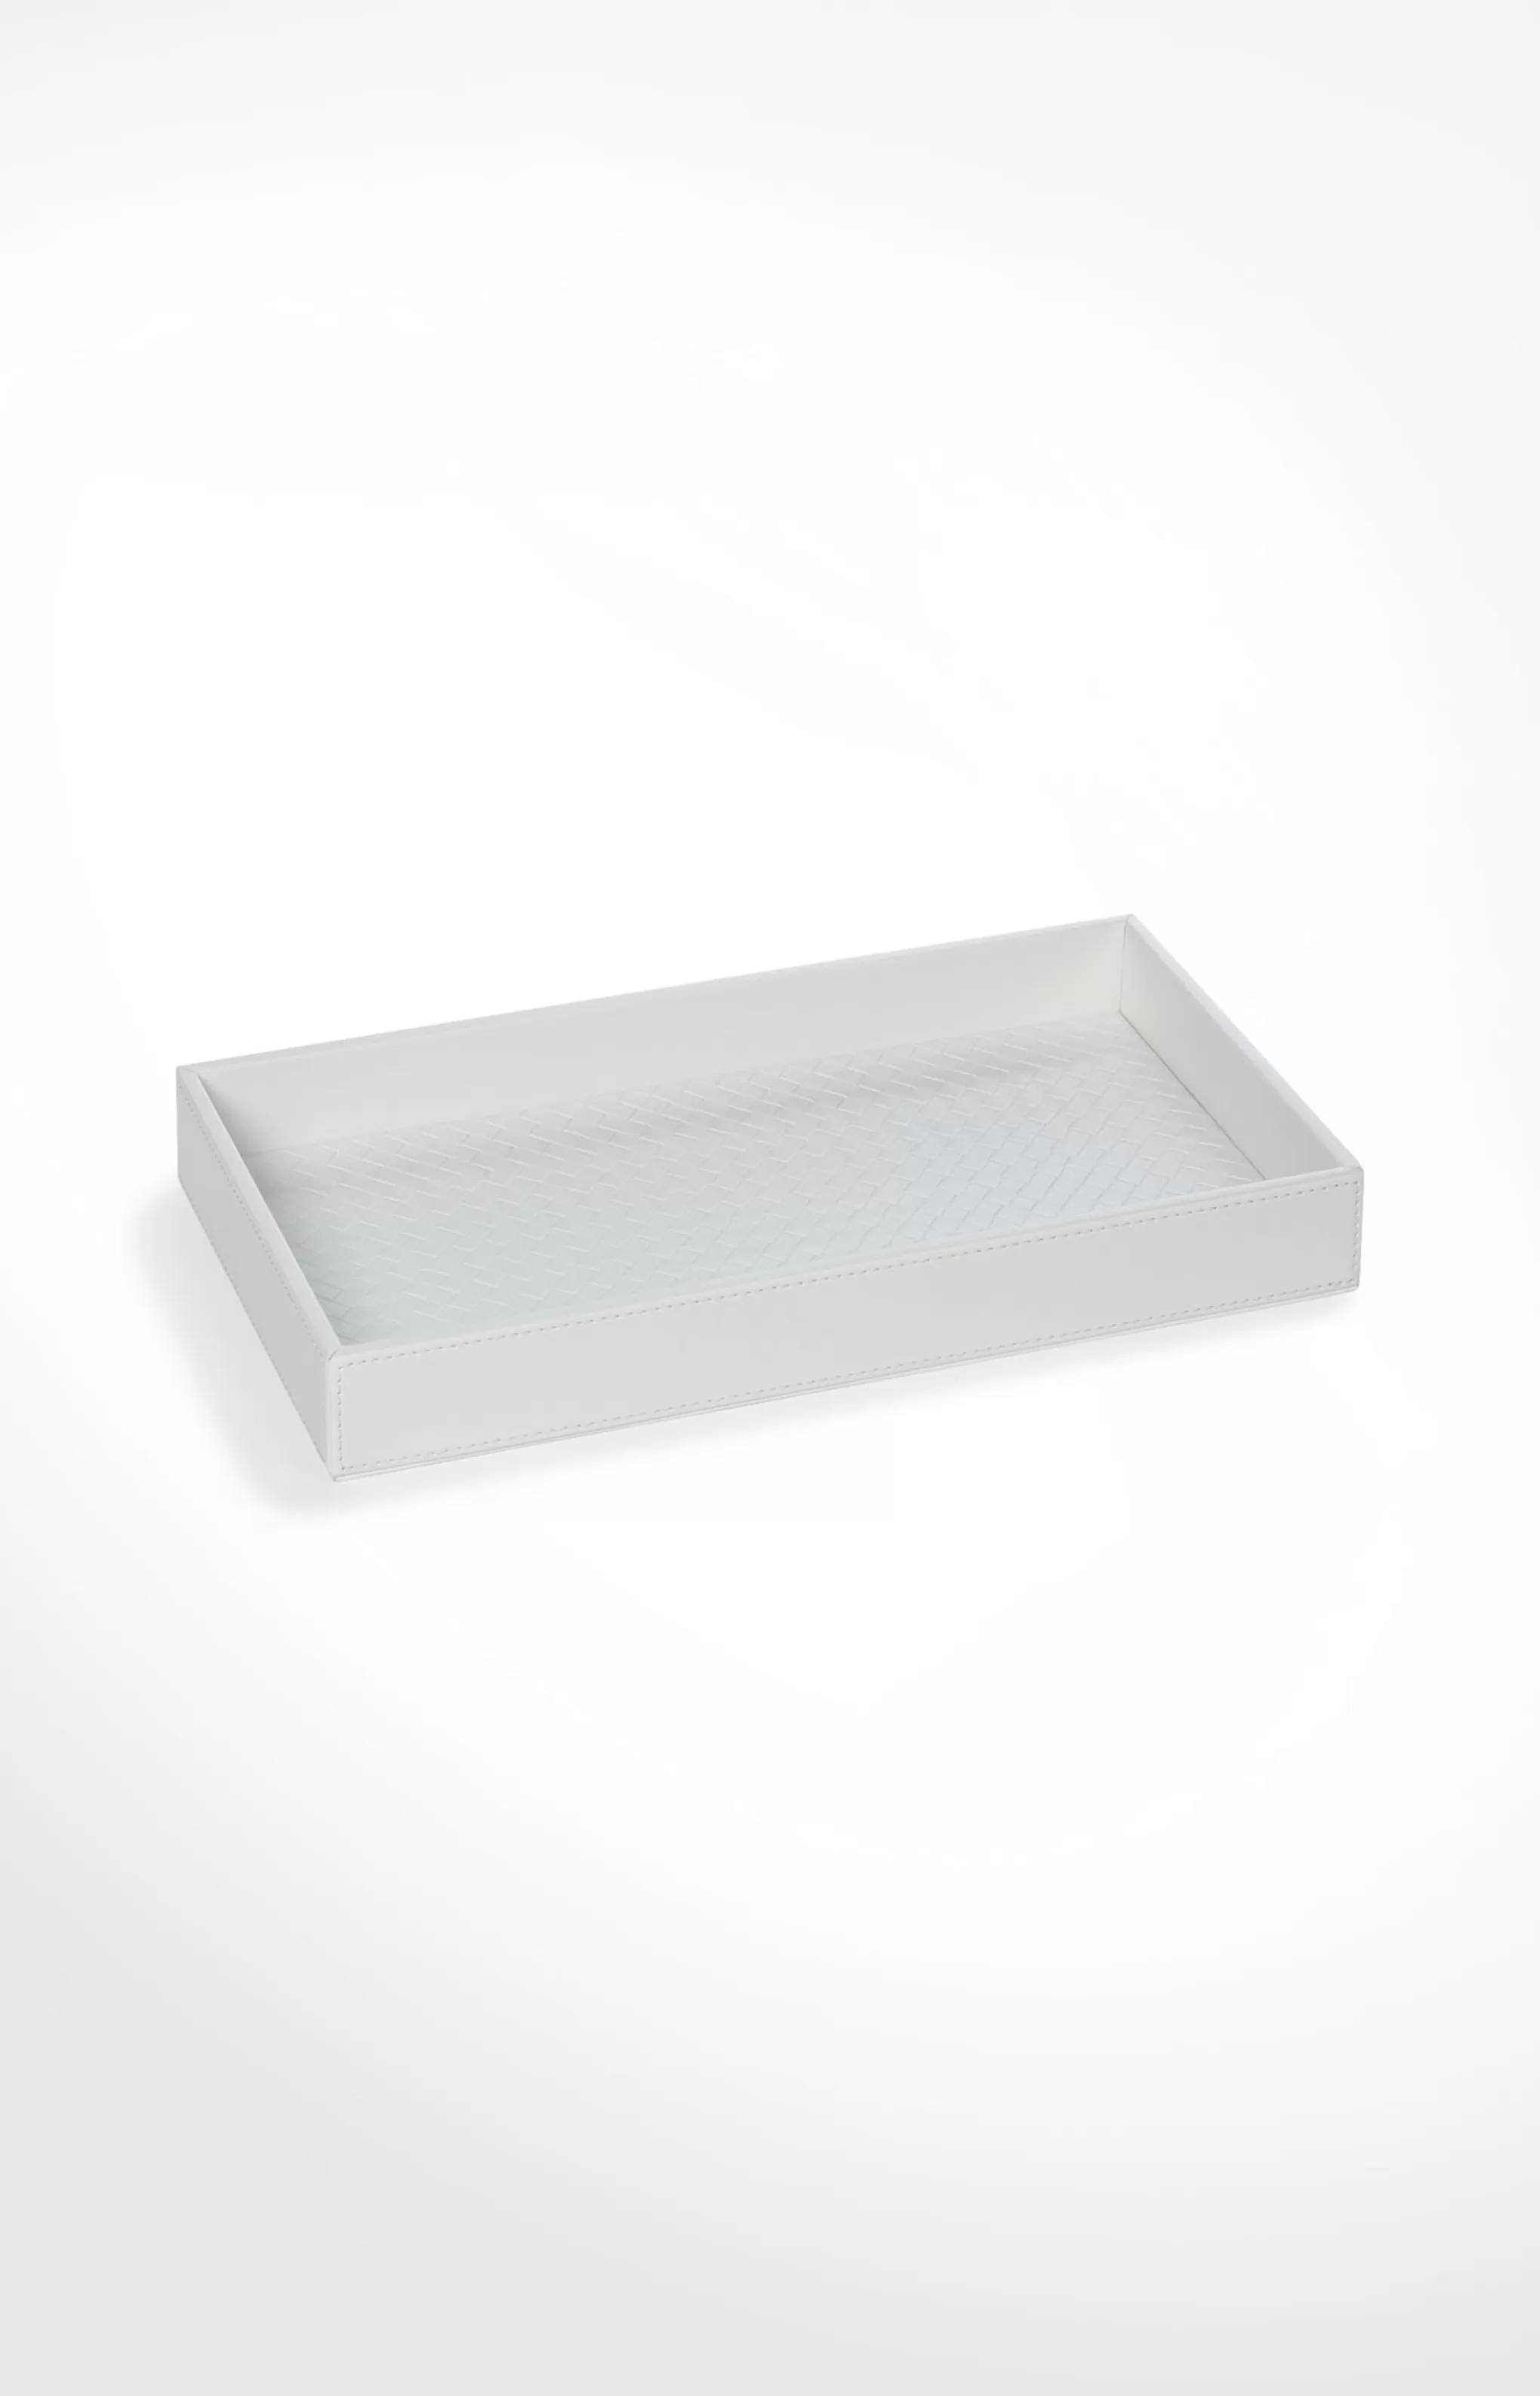 Bathroom Accessories | Discover Everything | Home Accessories | Table Accessories*JOOP Bathroom Accessories | Discover Everything | Home Accessories | Table Accessories Bathline tray, white